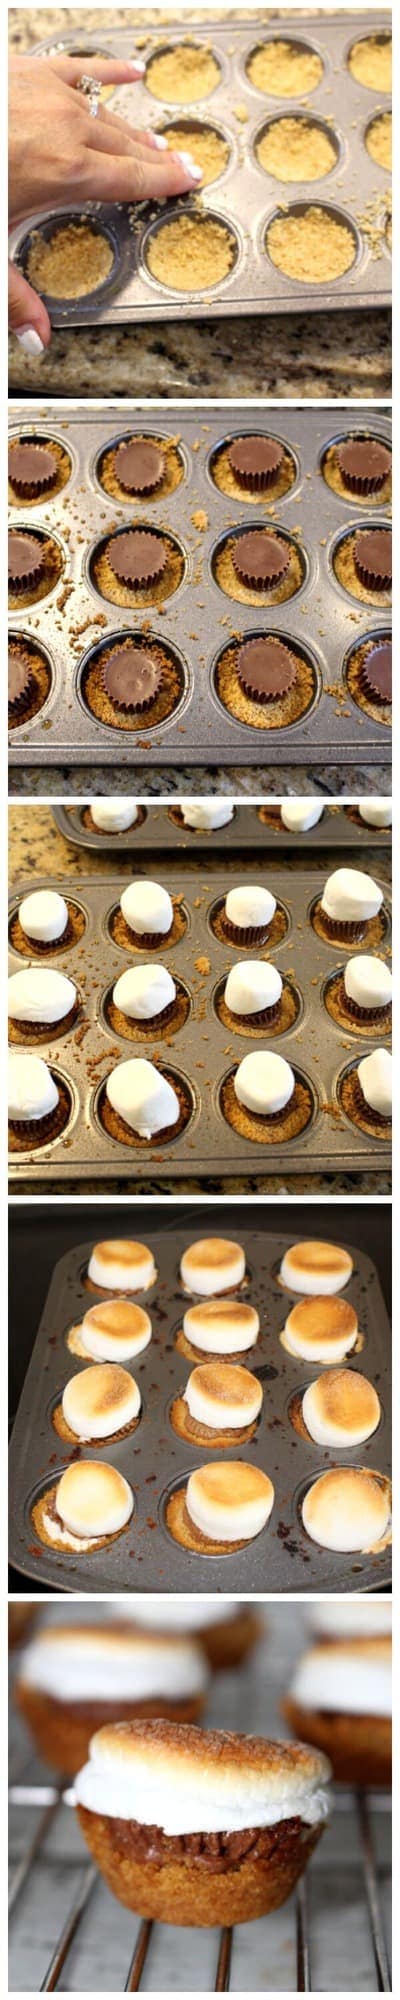 Looking for new ways to make s'mores,? Then these S'mores Bites will be your new favorite S'mores recipe that you can make in the oven all year round!